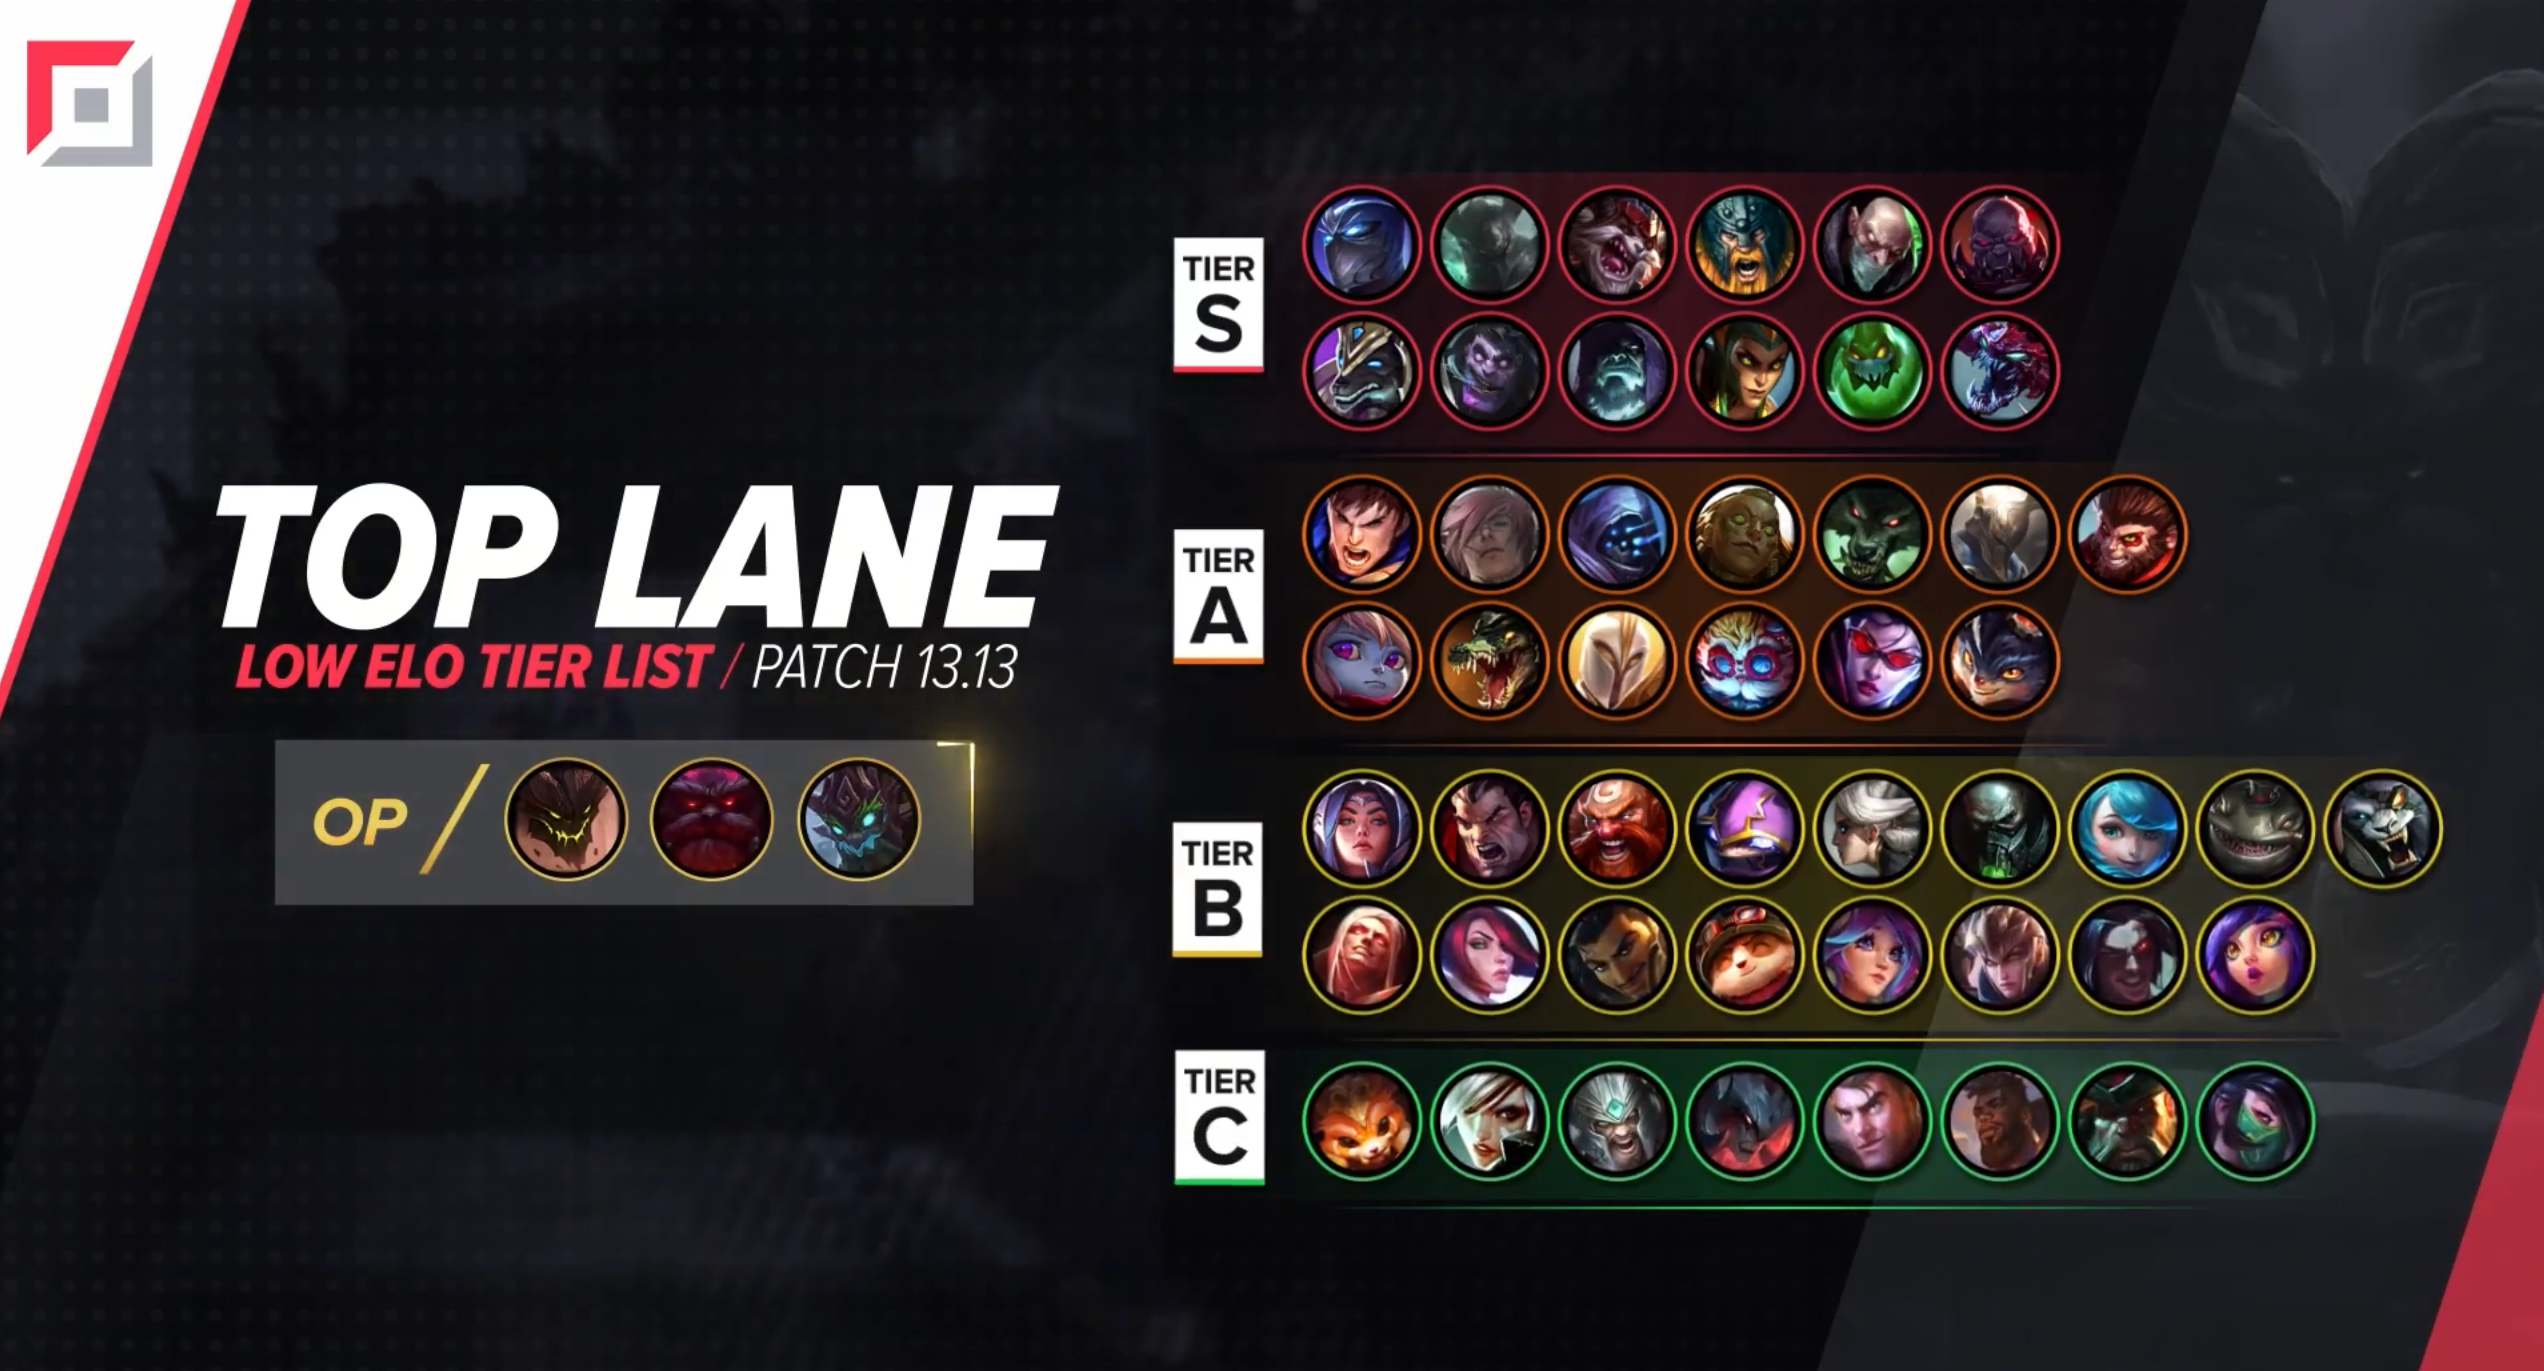 This LoL top laner has the lowest win rate of Patch 13.8